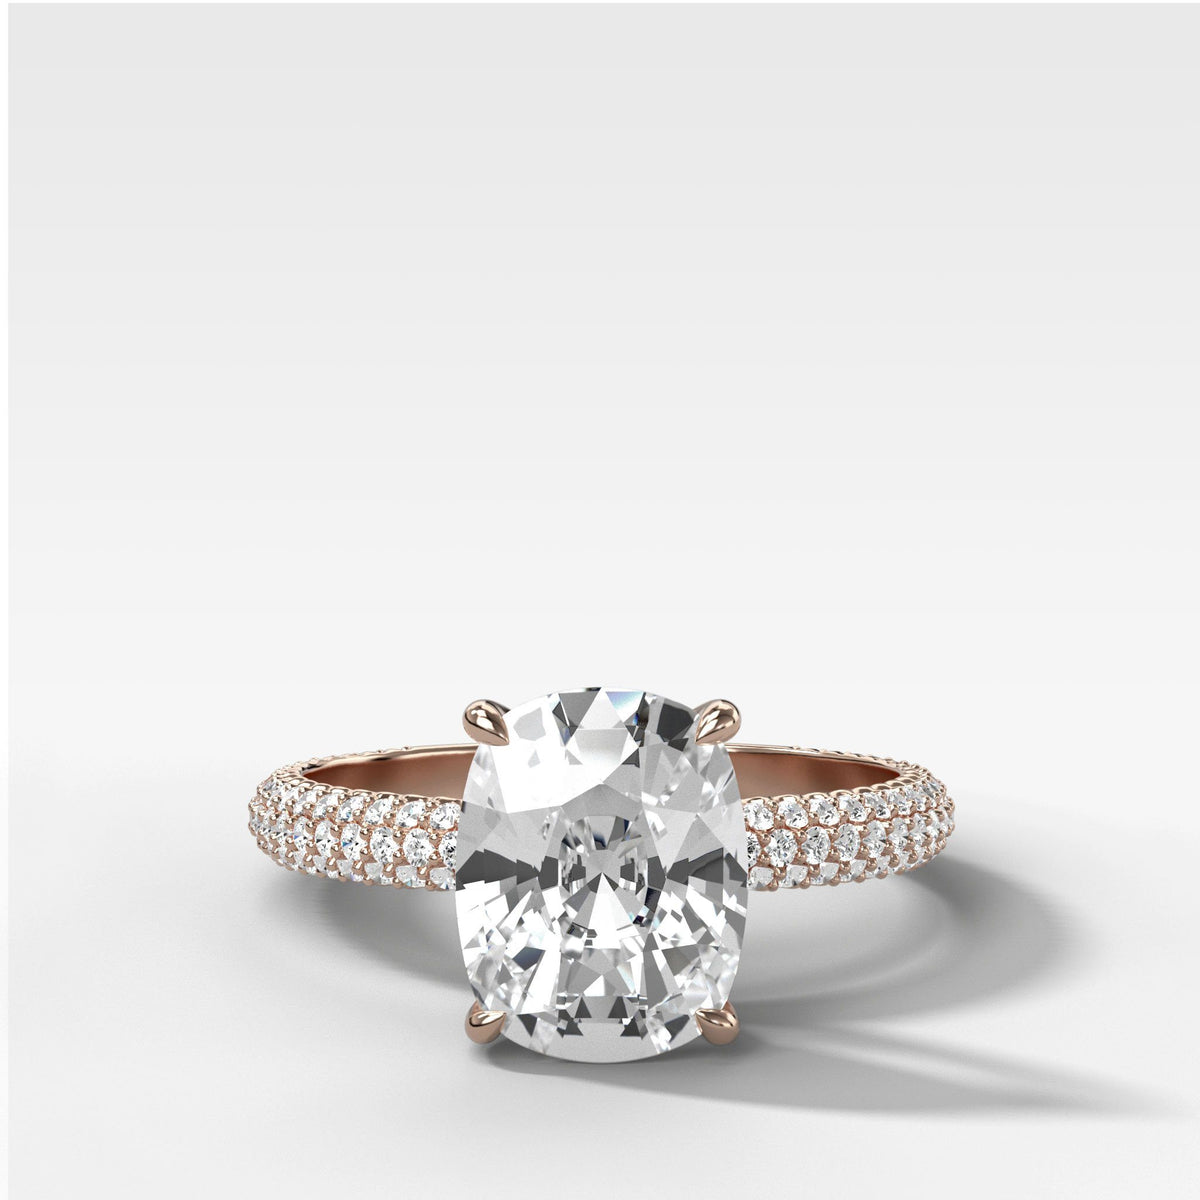 Triple Row Pavé Engagement Ring With Elongated Cushion Cut by Good Stone in Rose Gold